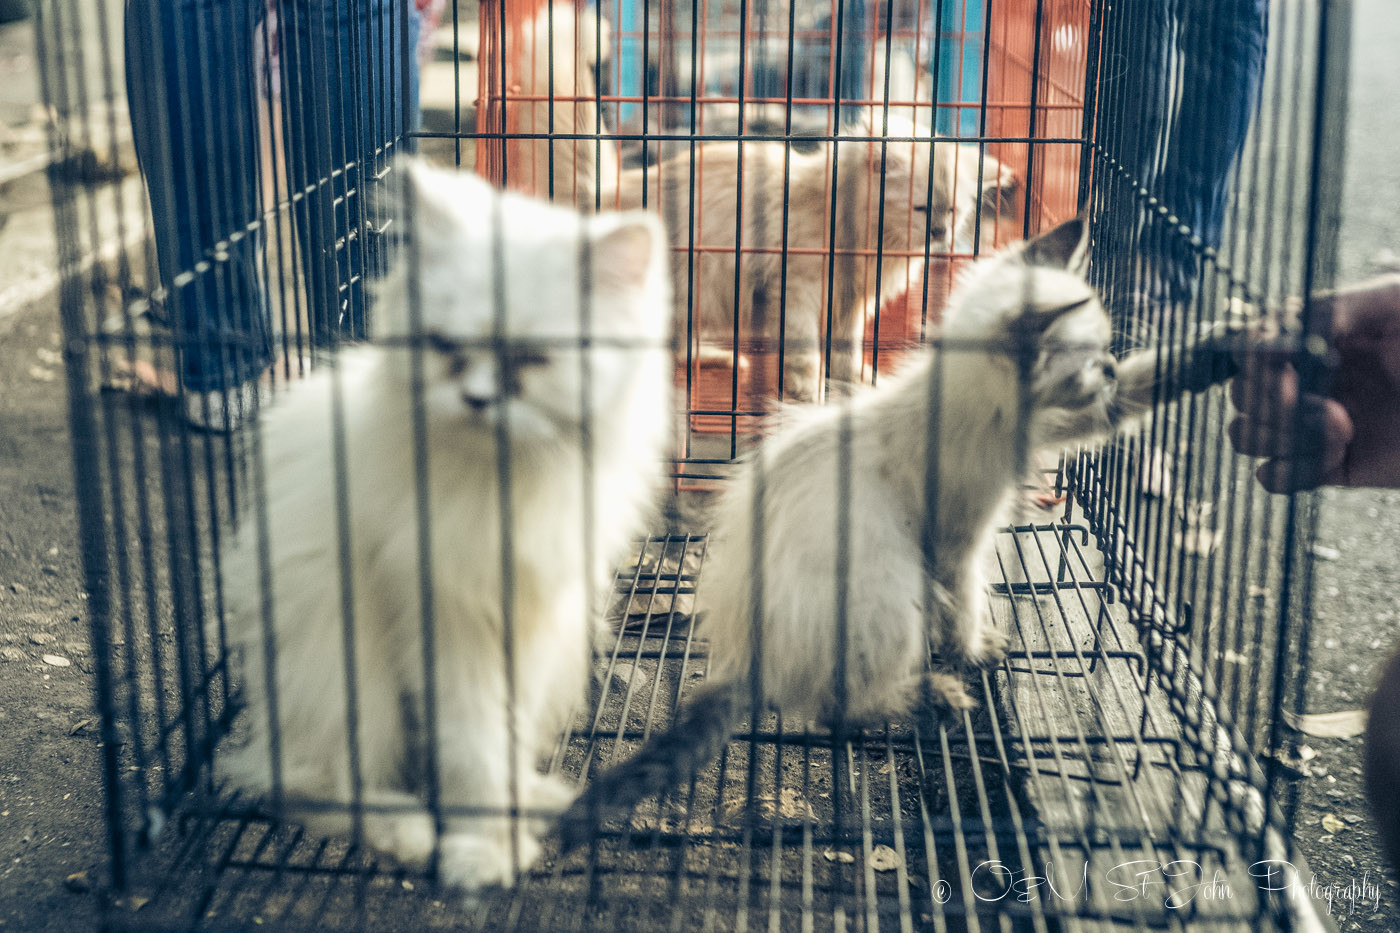 Kittens for sale at the Malang Bird Market, East Java, Indonesia